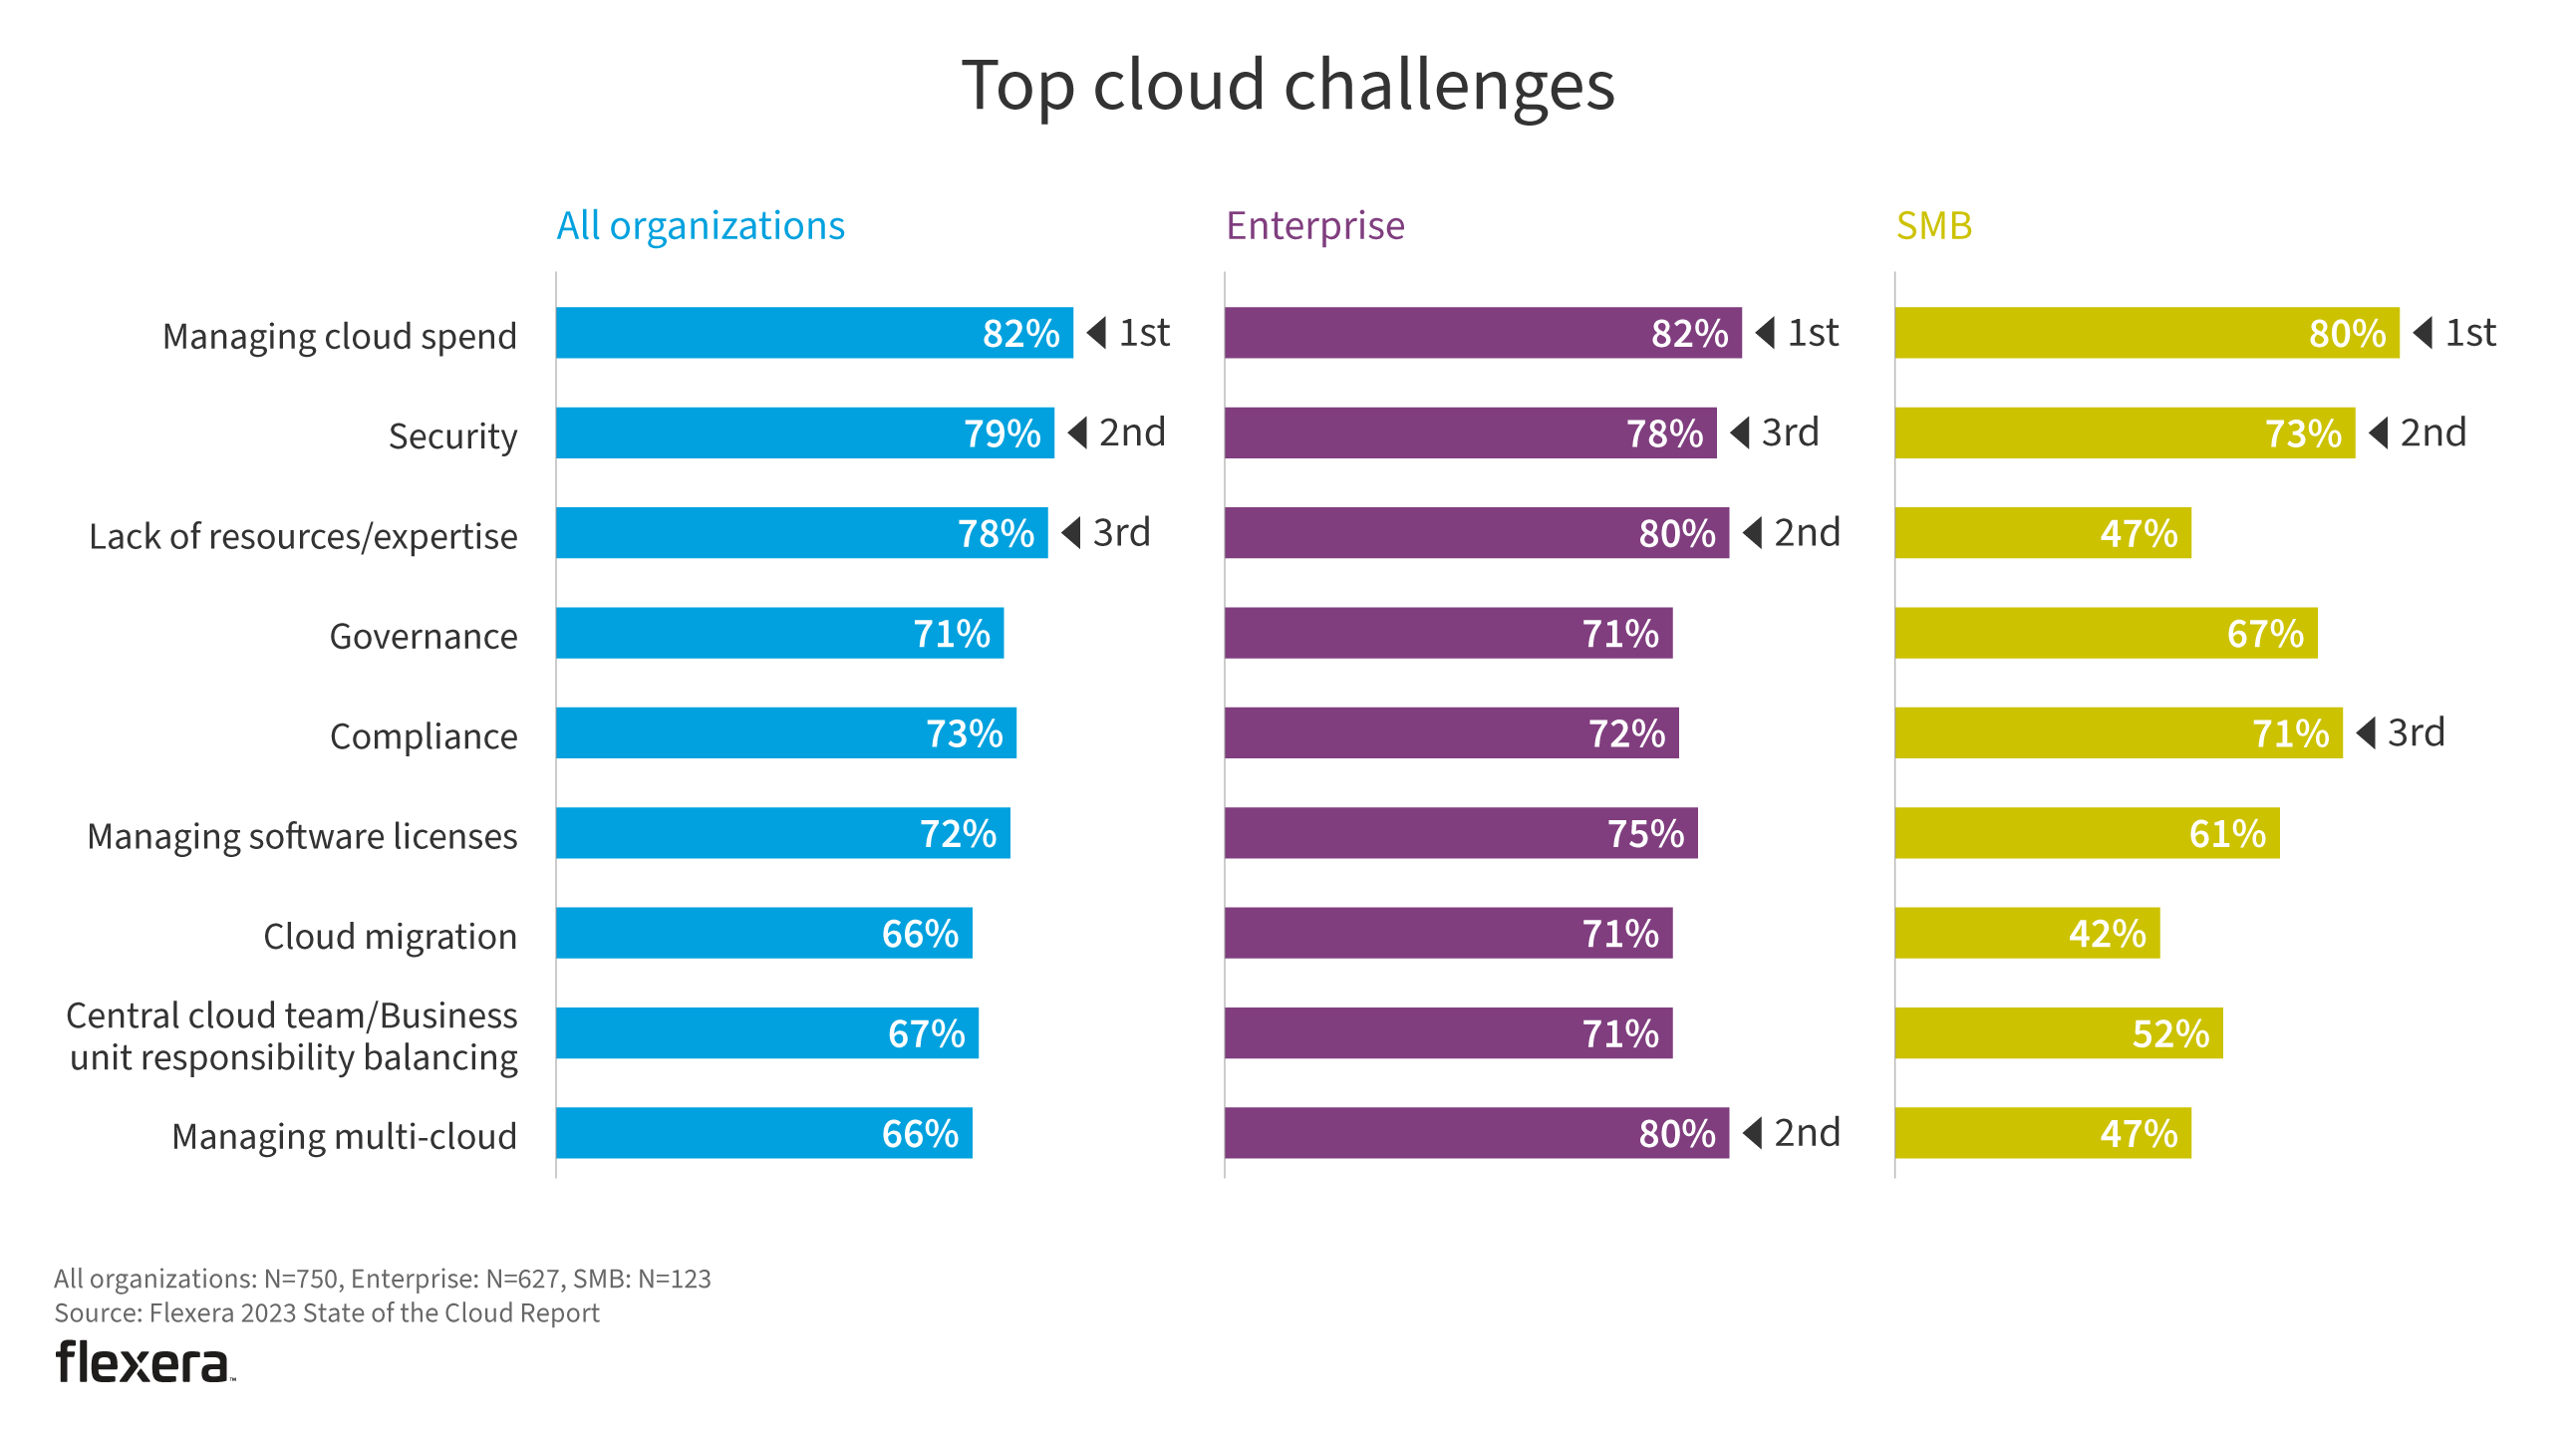 Chart of Top Cloud Computing Challenges from the Flexera Study